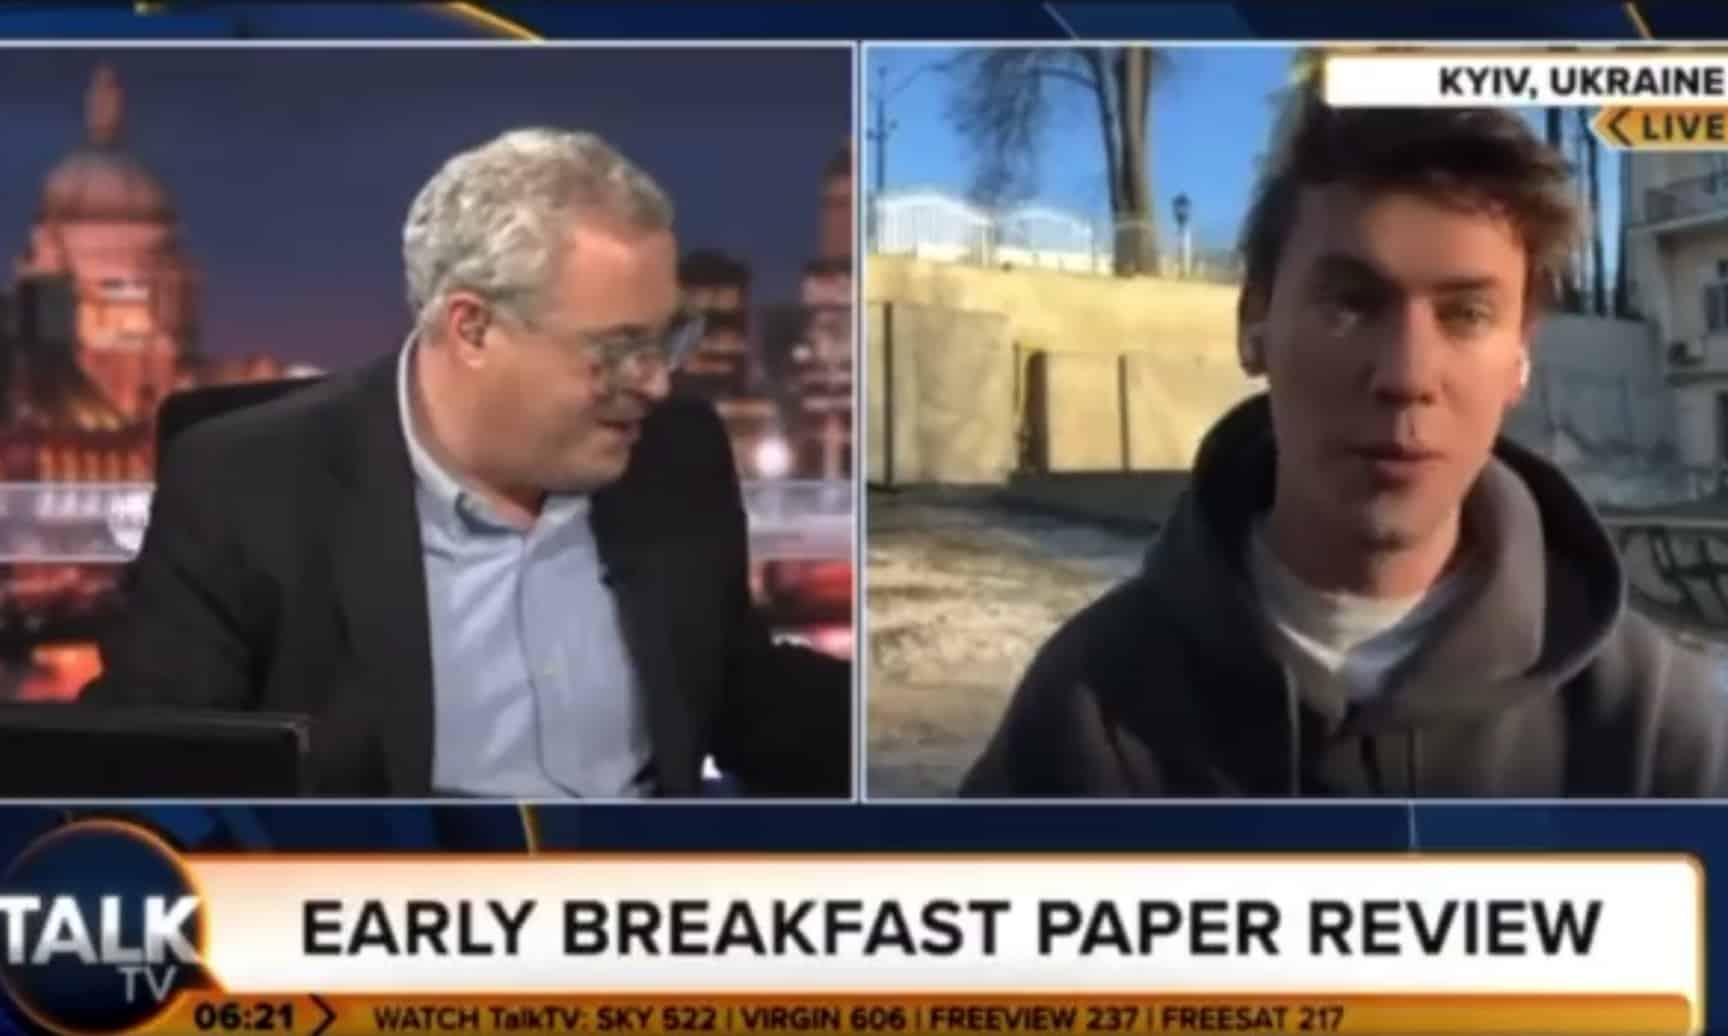 TalkTV host shuts down reporter after he links food shortages to Brexit